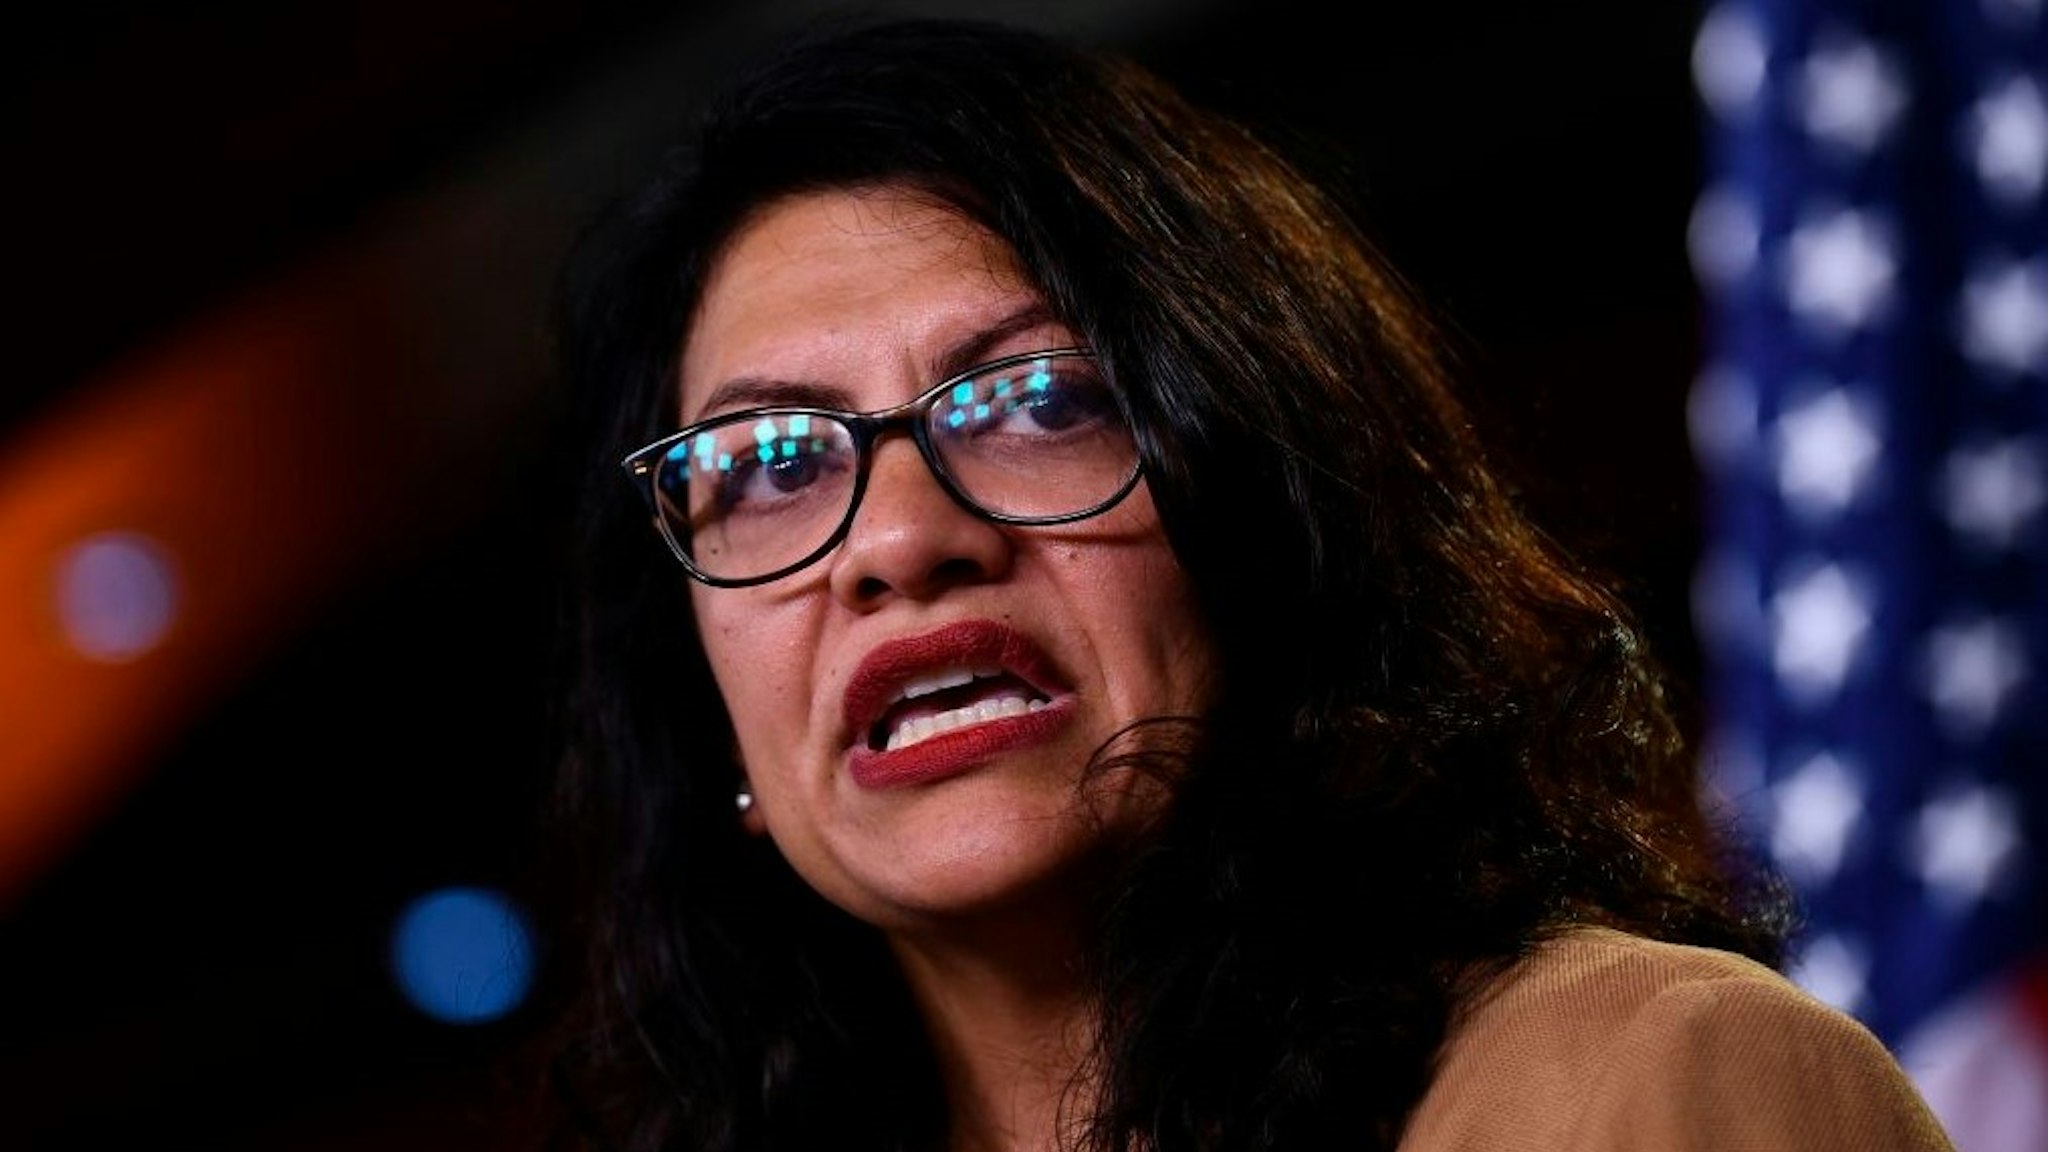 US Representative Rashida Tlaib (D-MI) speaks during a press conference, to address remarks made by US President Donald Trump earlier in the day, at the US Capitol in Washington, DC on July 15, 2019. - President Donald Trump stepped up his attacks on four progressive Democratic congresswomen, saying if they're not happy in the United States "they can leave." (Photo by Brendan Smialowski / AFP) (Photo credit should read